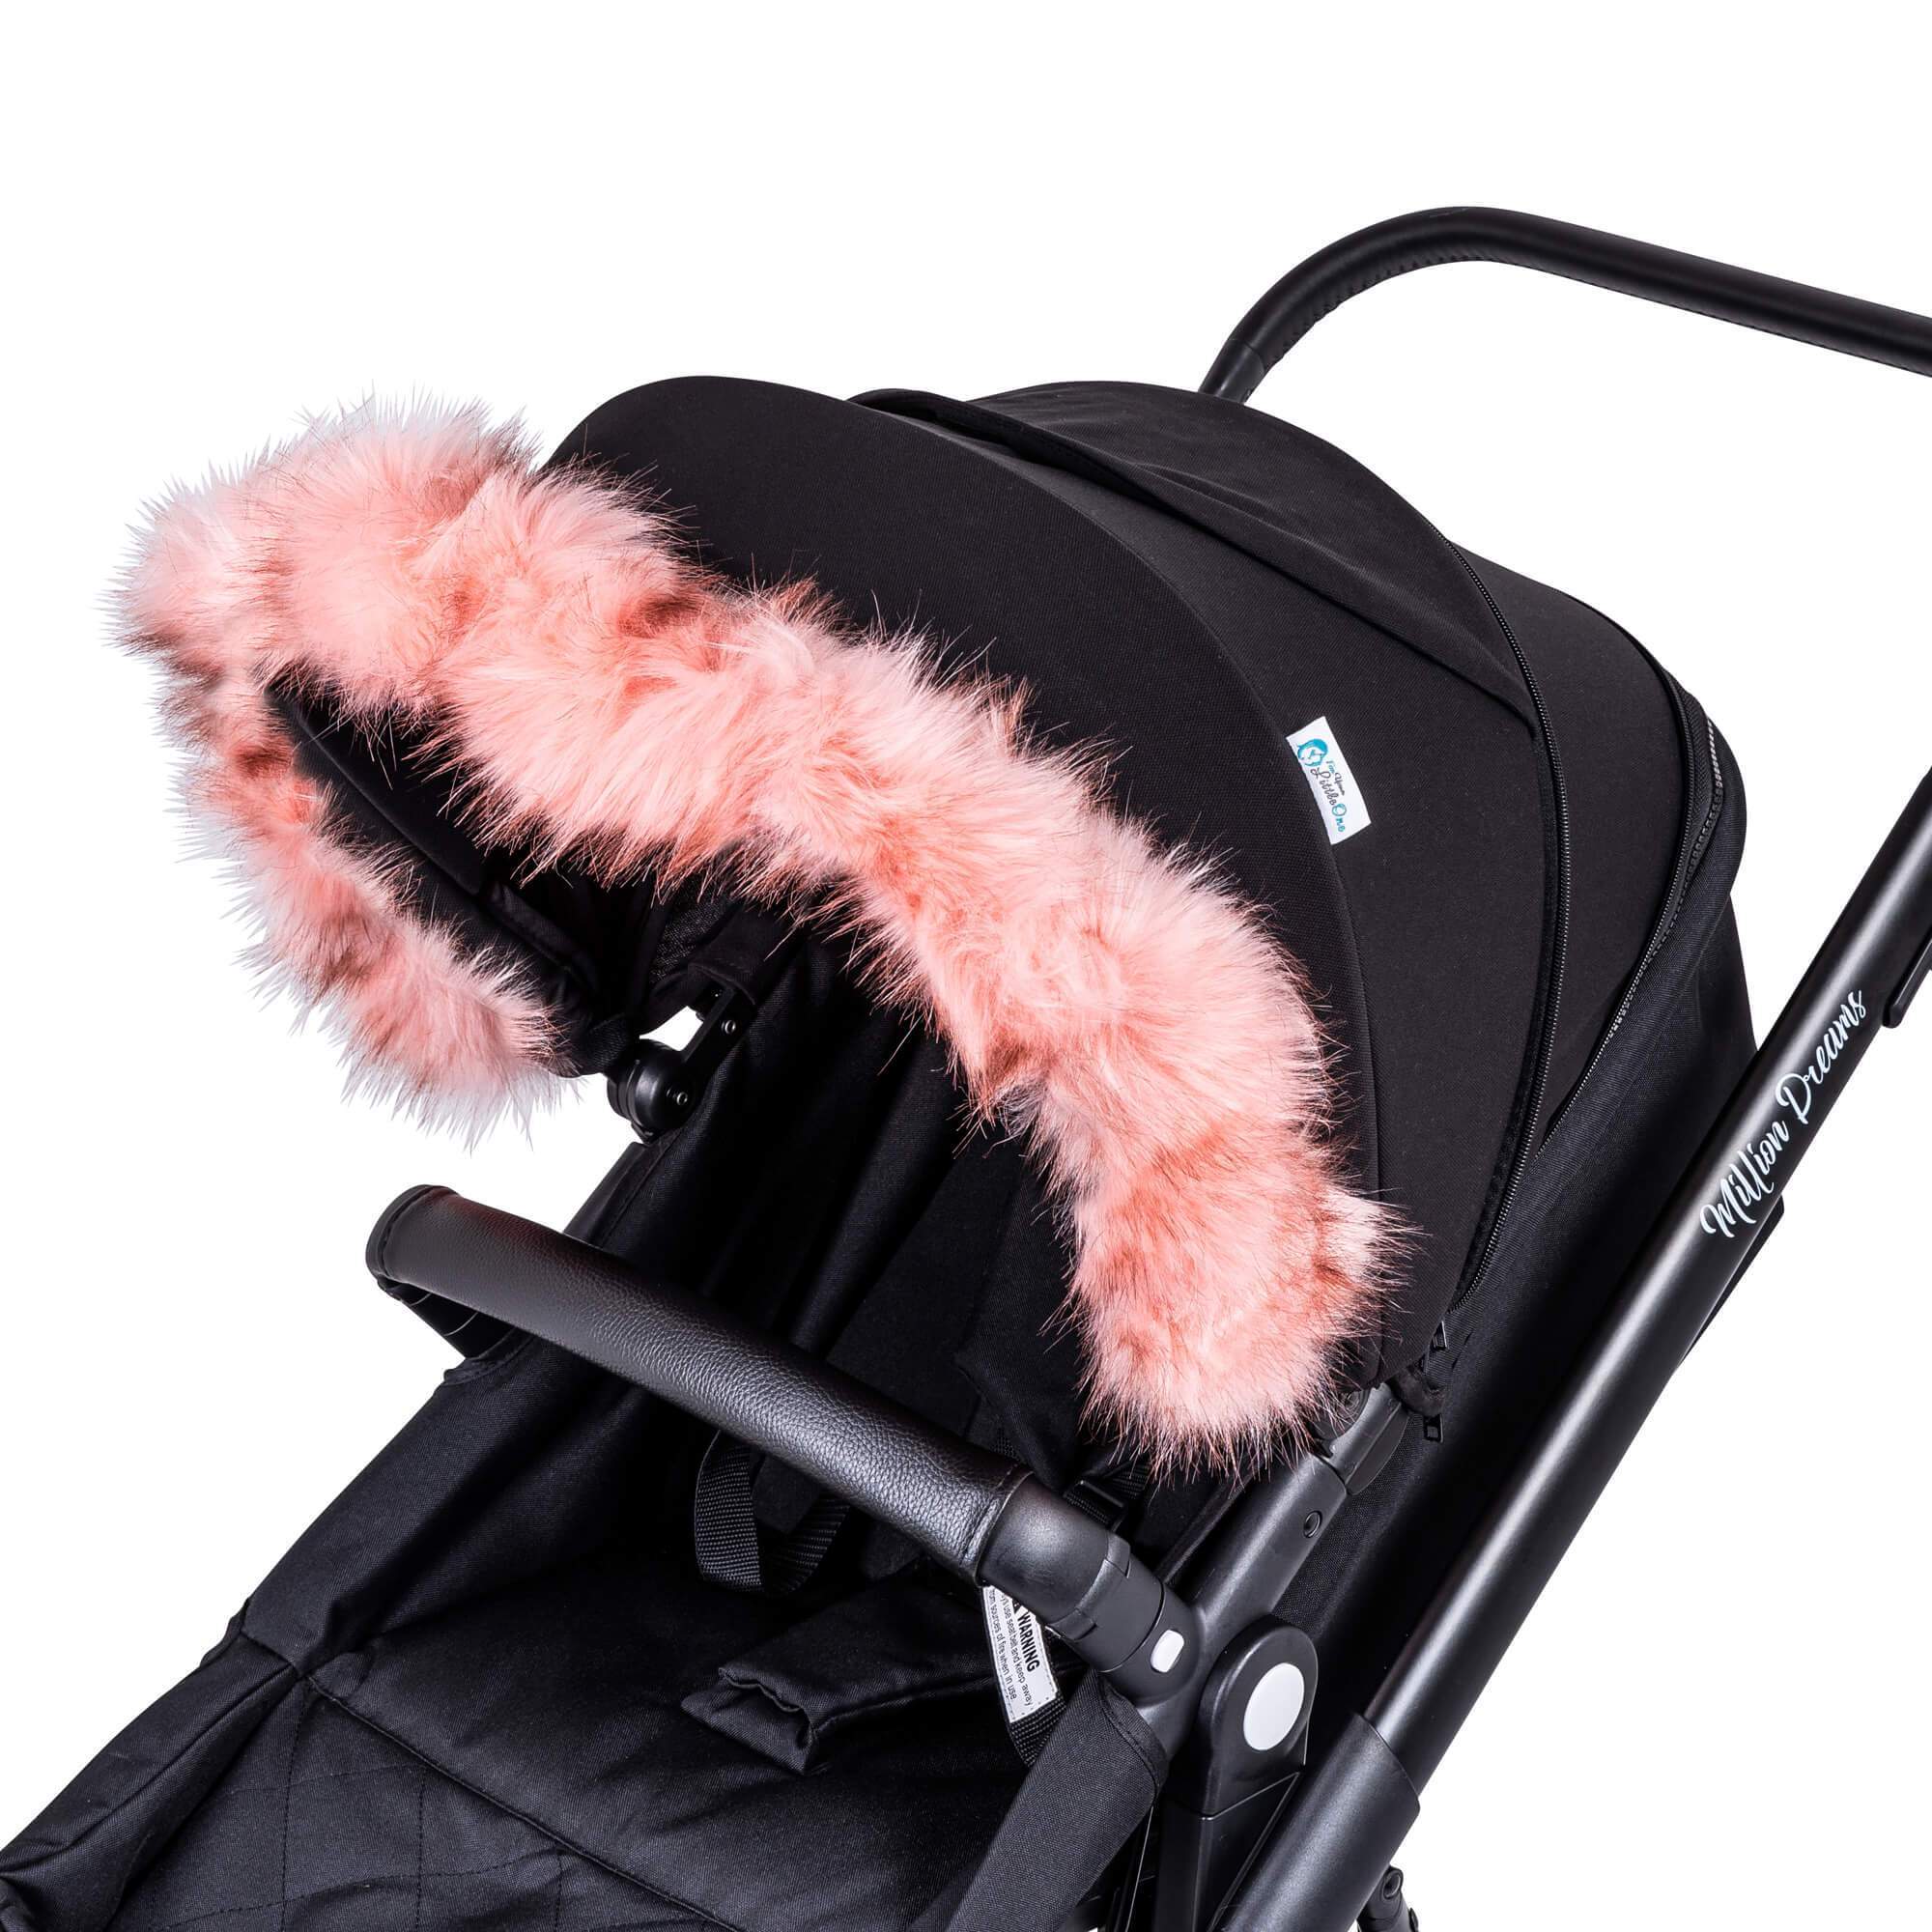 Pram Fur Hood Trim Attachment for Pushchair Compatible with Recaro - For Your Little One